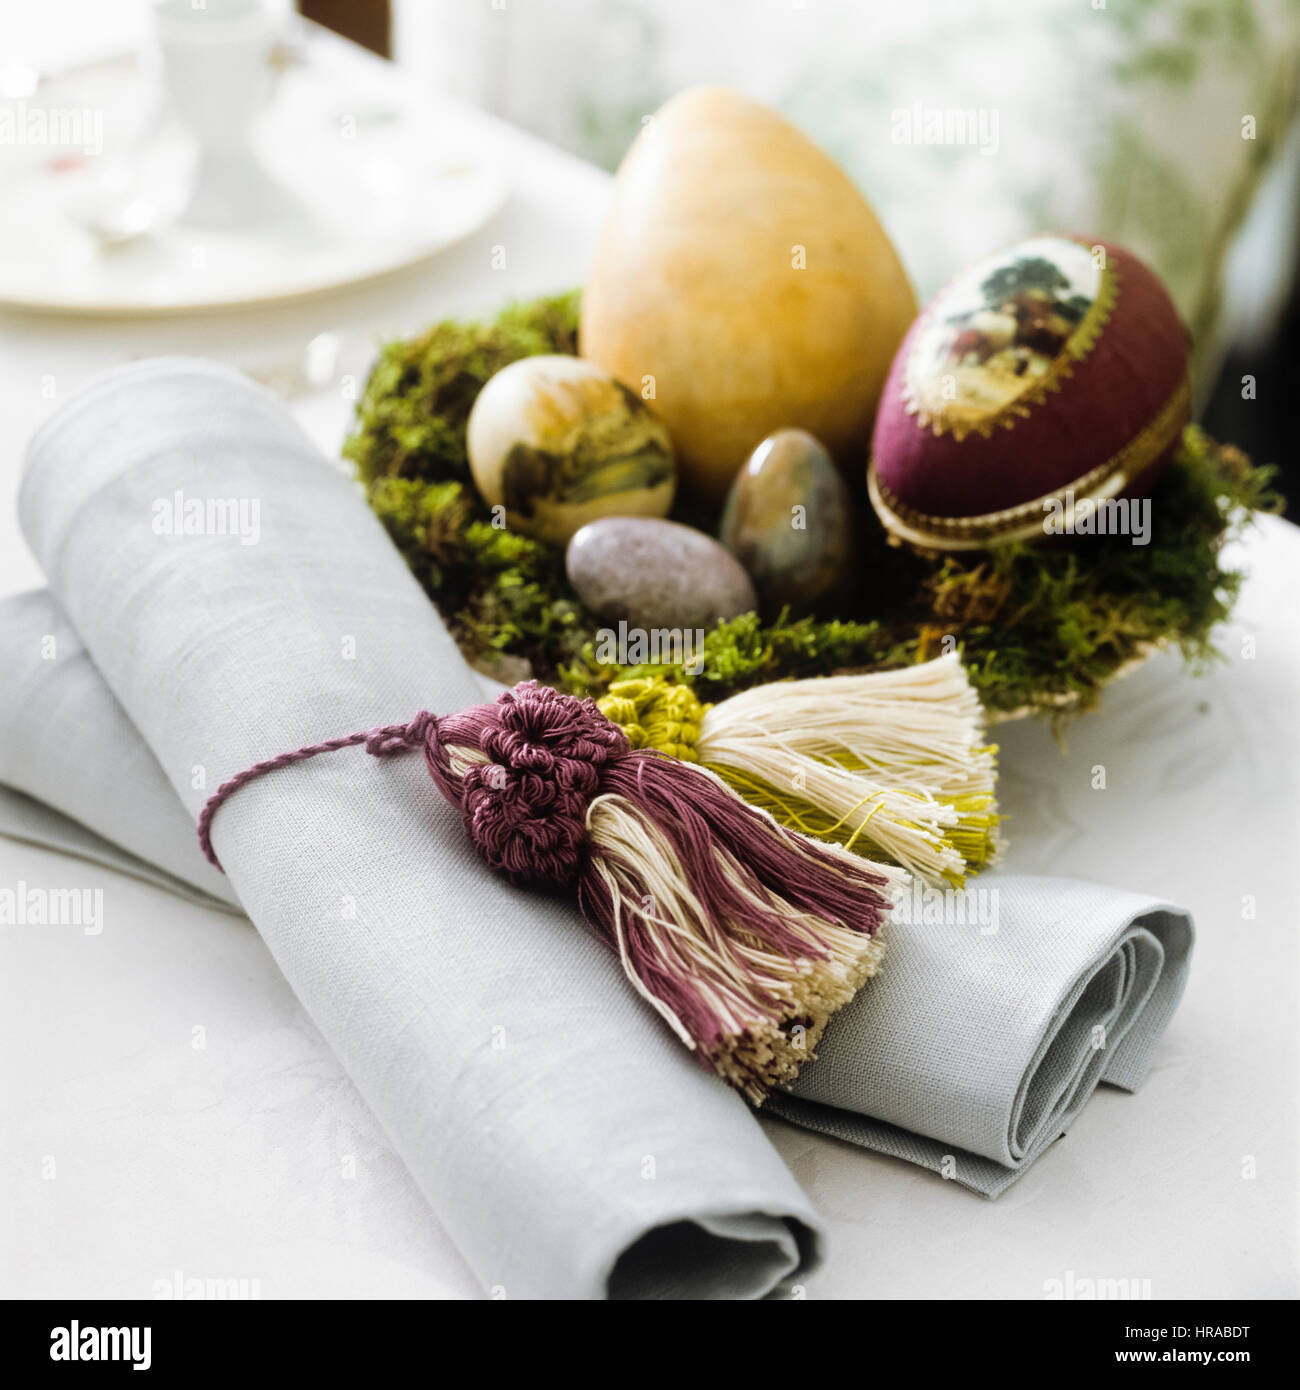 An Easter table setting. Stock Photo